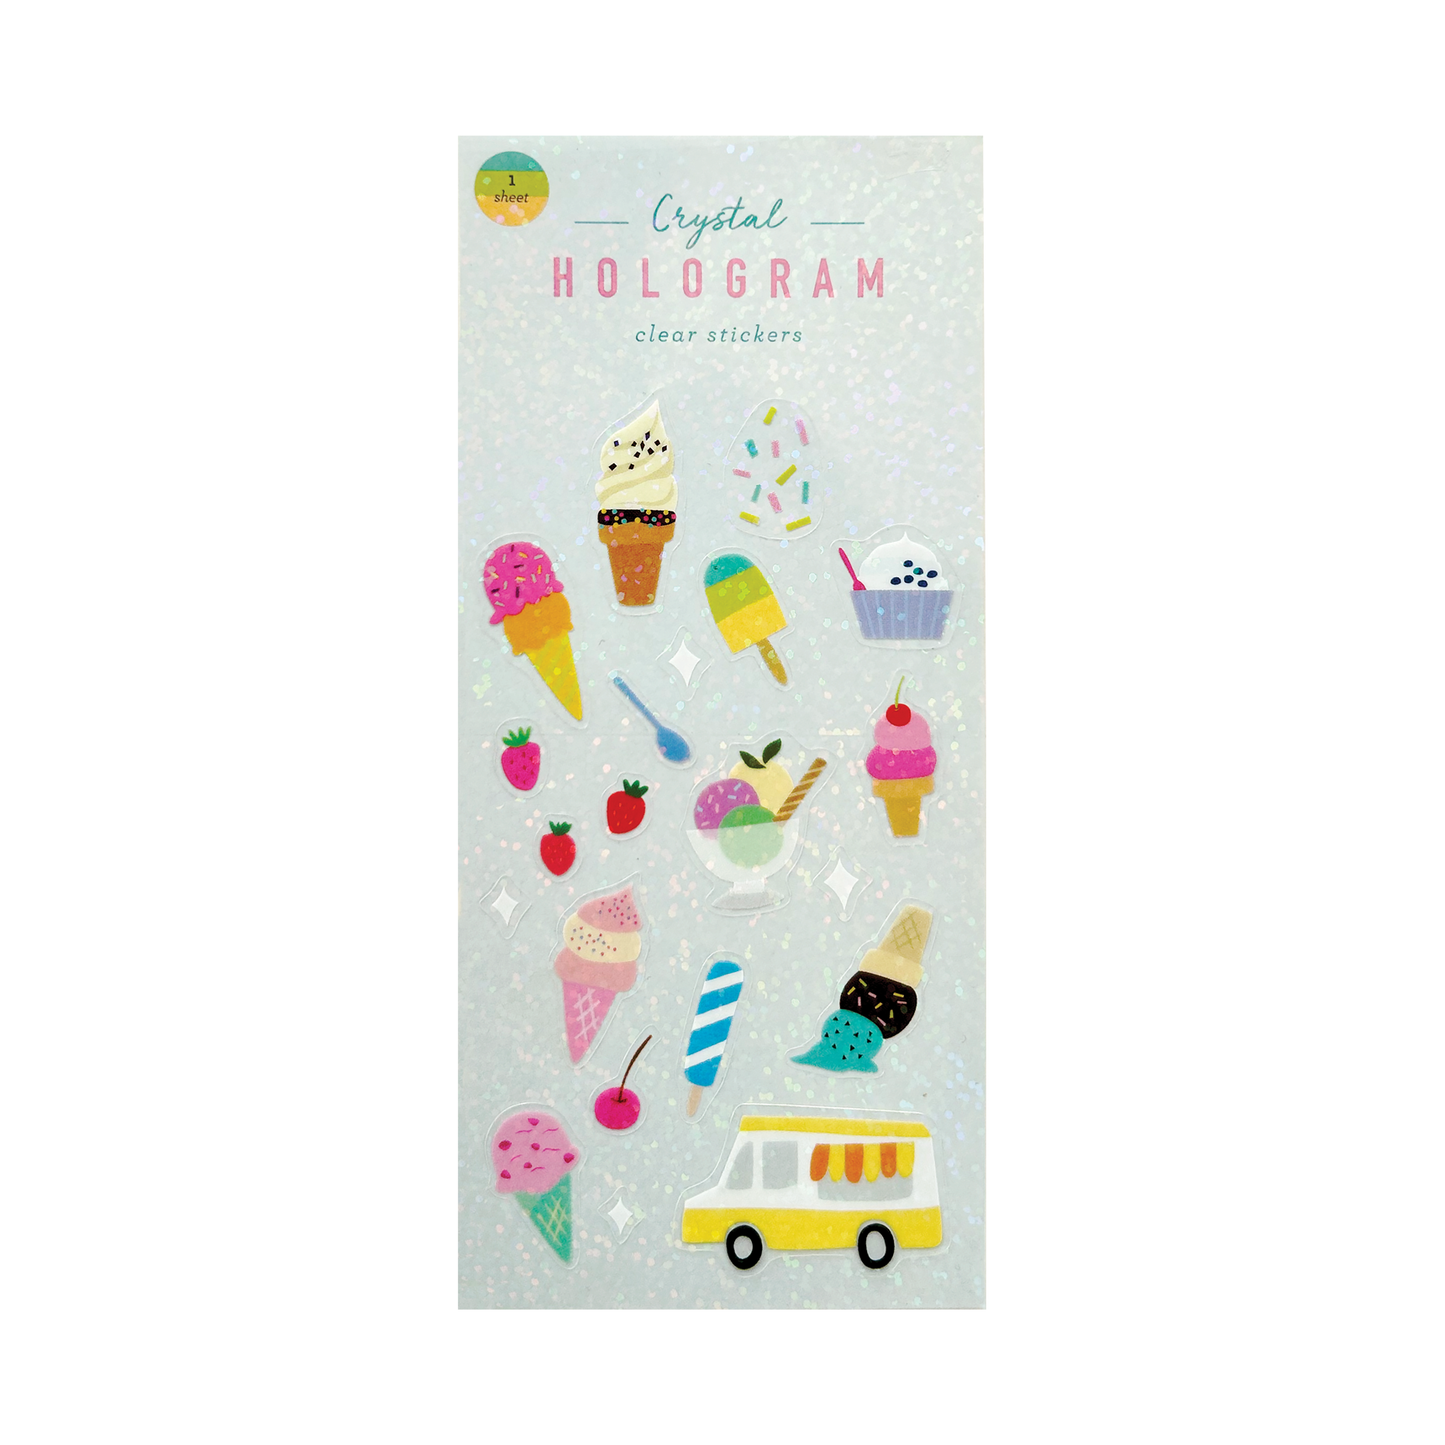 Girl of All Work Ice Cream Truck Crystal Hologram Clear Stickers